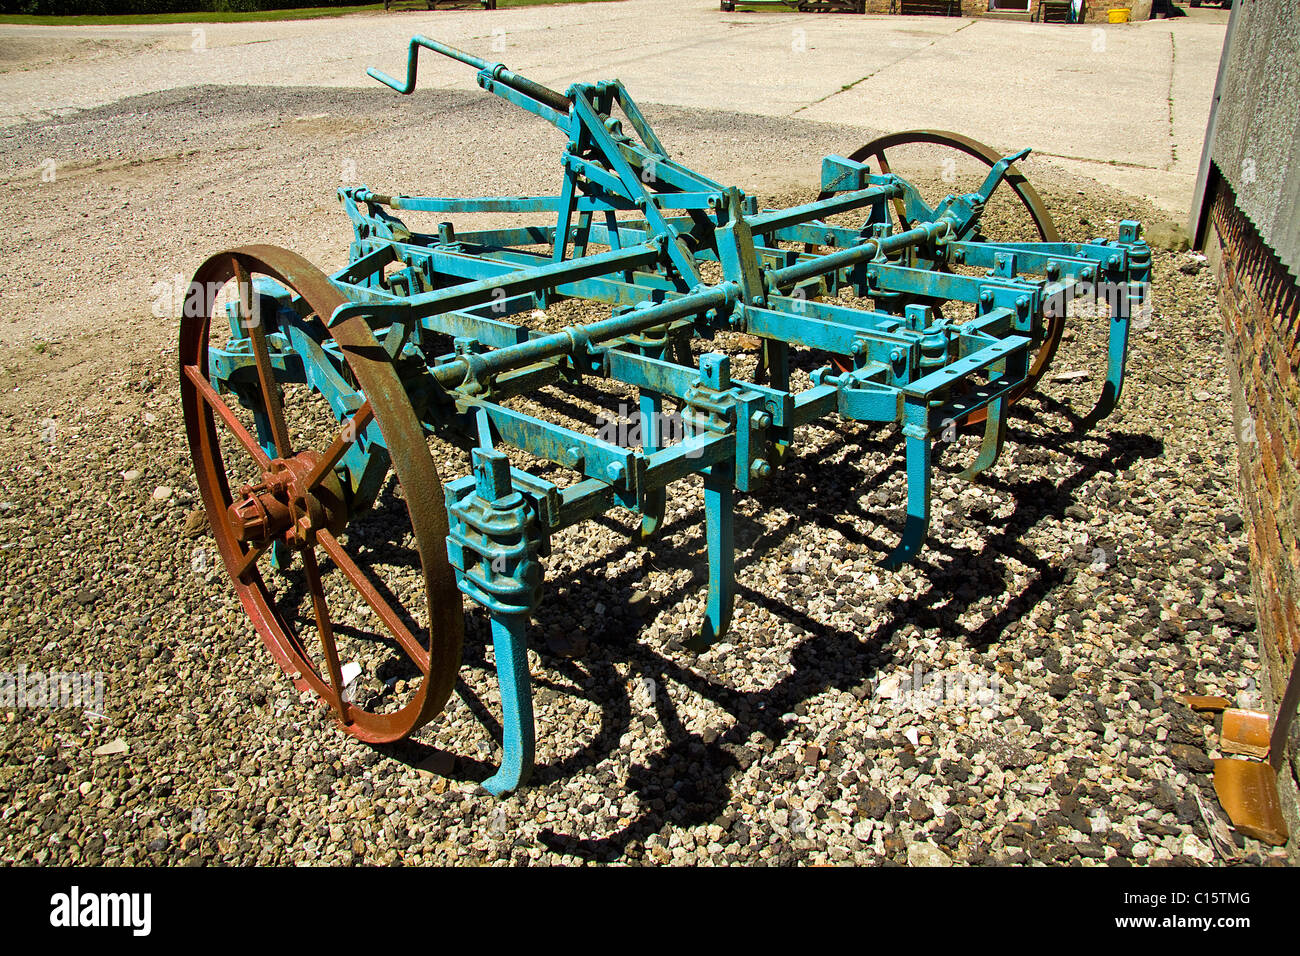 Nicholson's early soil cultivator - museum piece Stock Photo